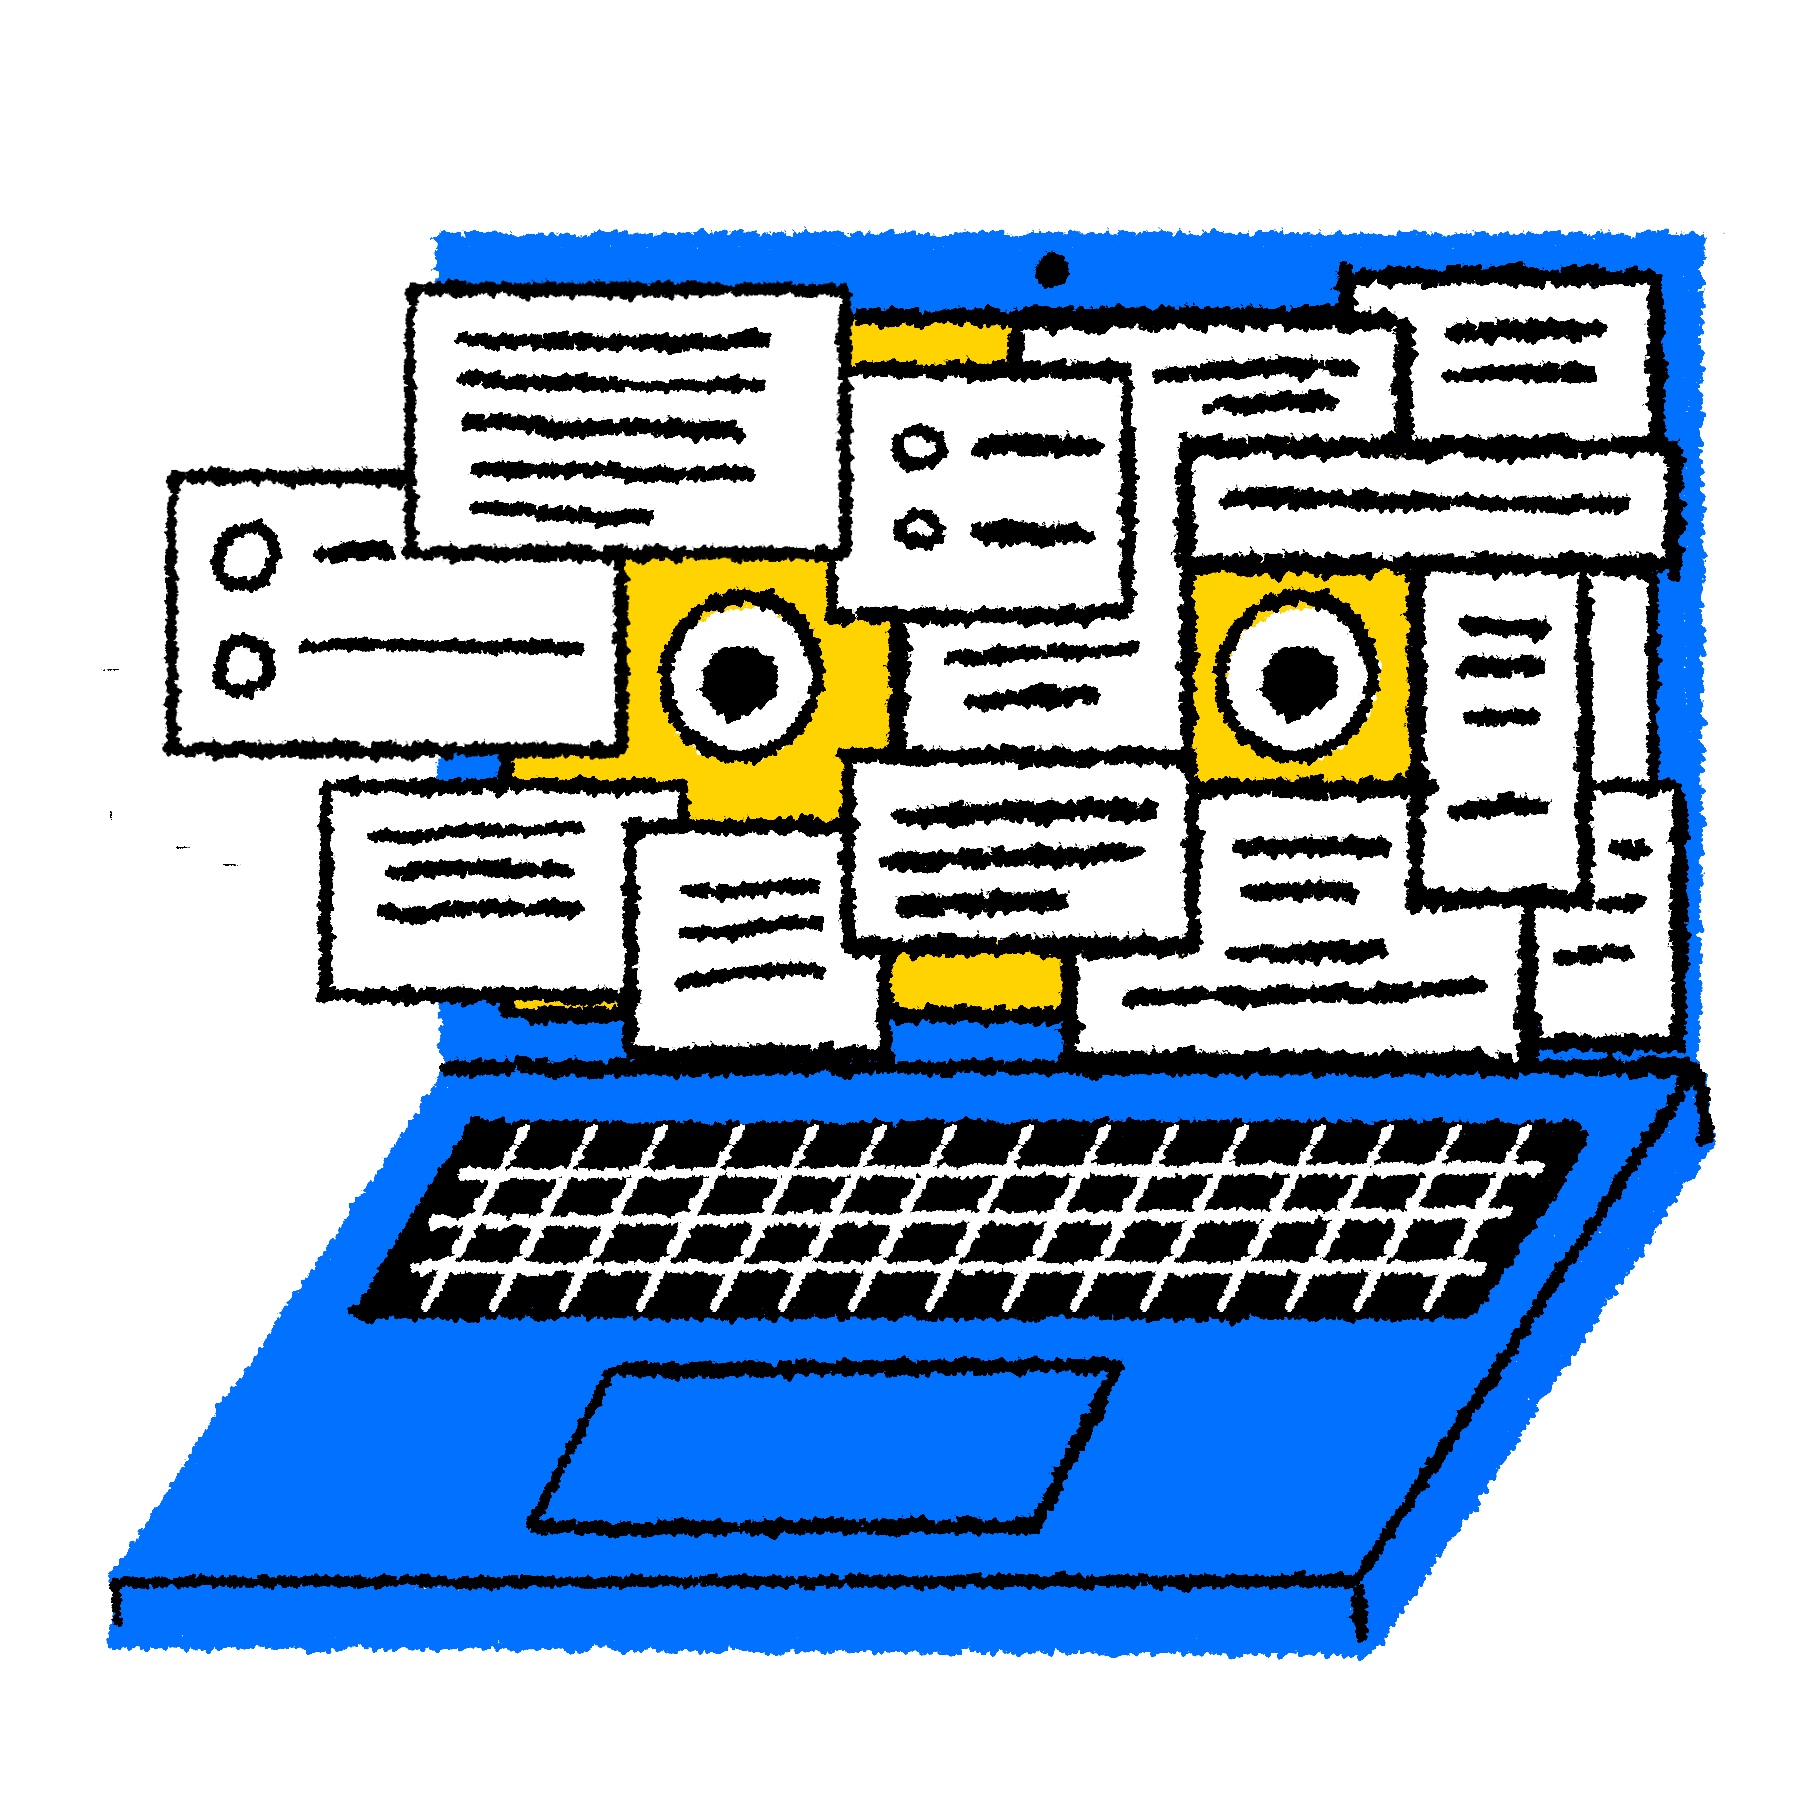 Spot illustration of a laptop plastered with several popup windows, with two eyes peering out.